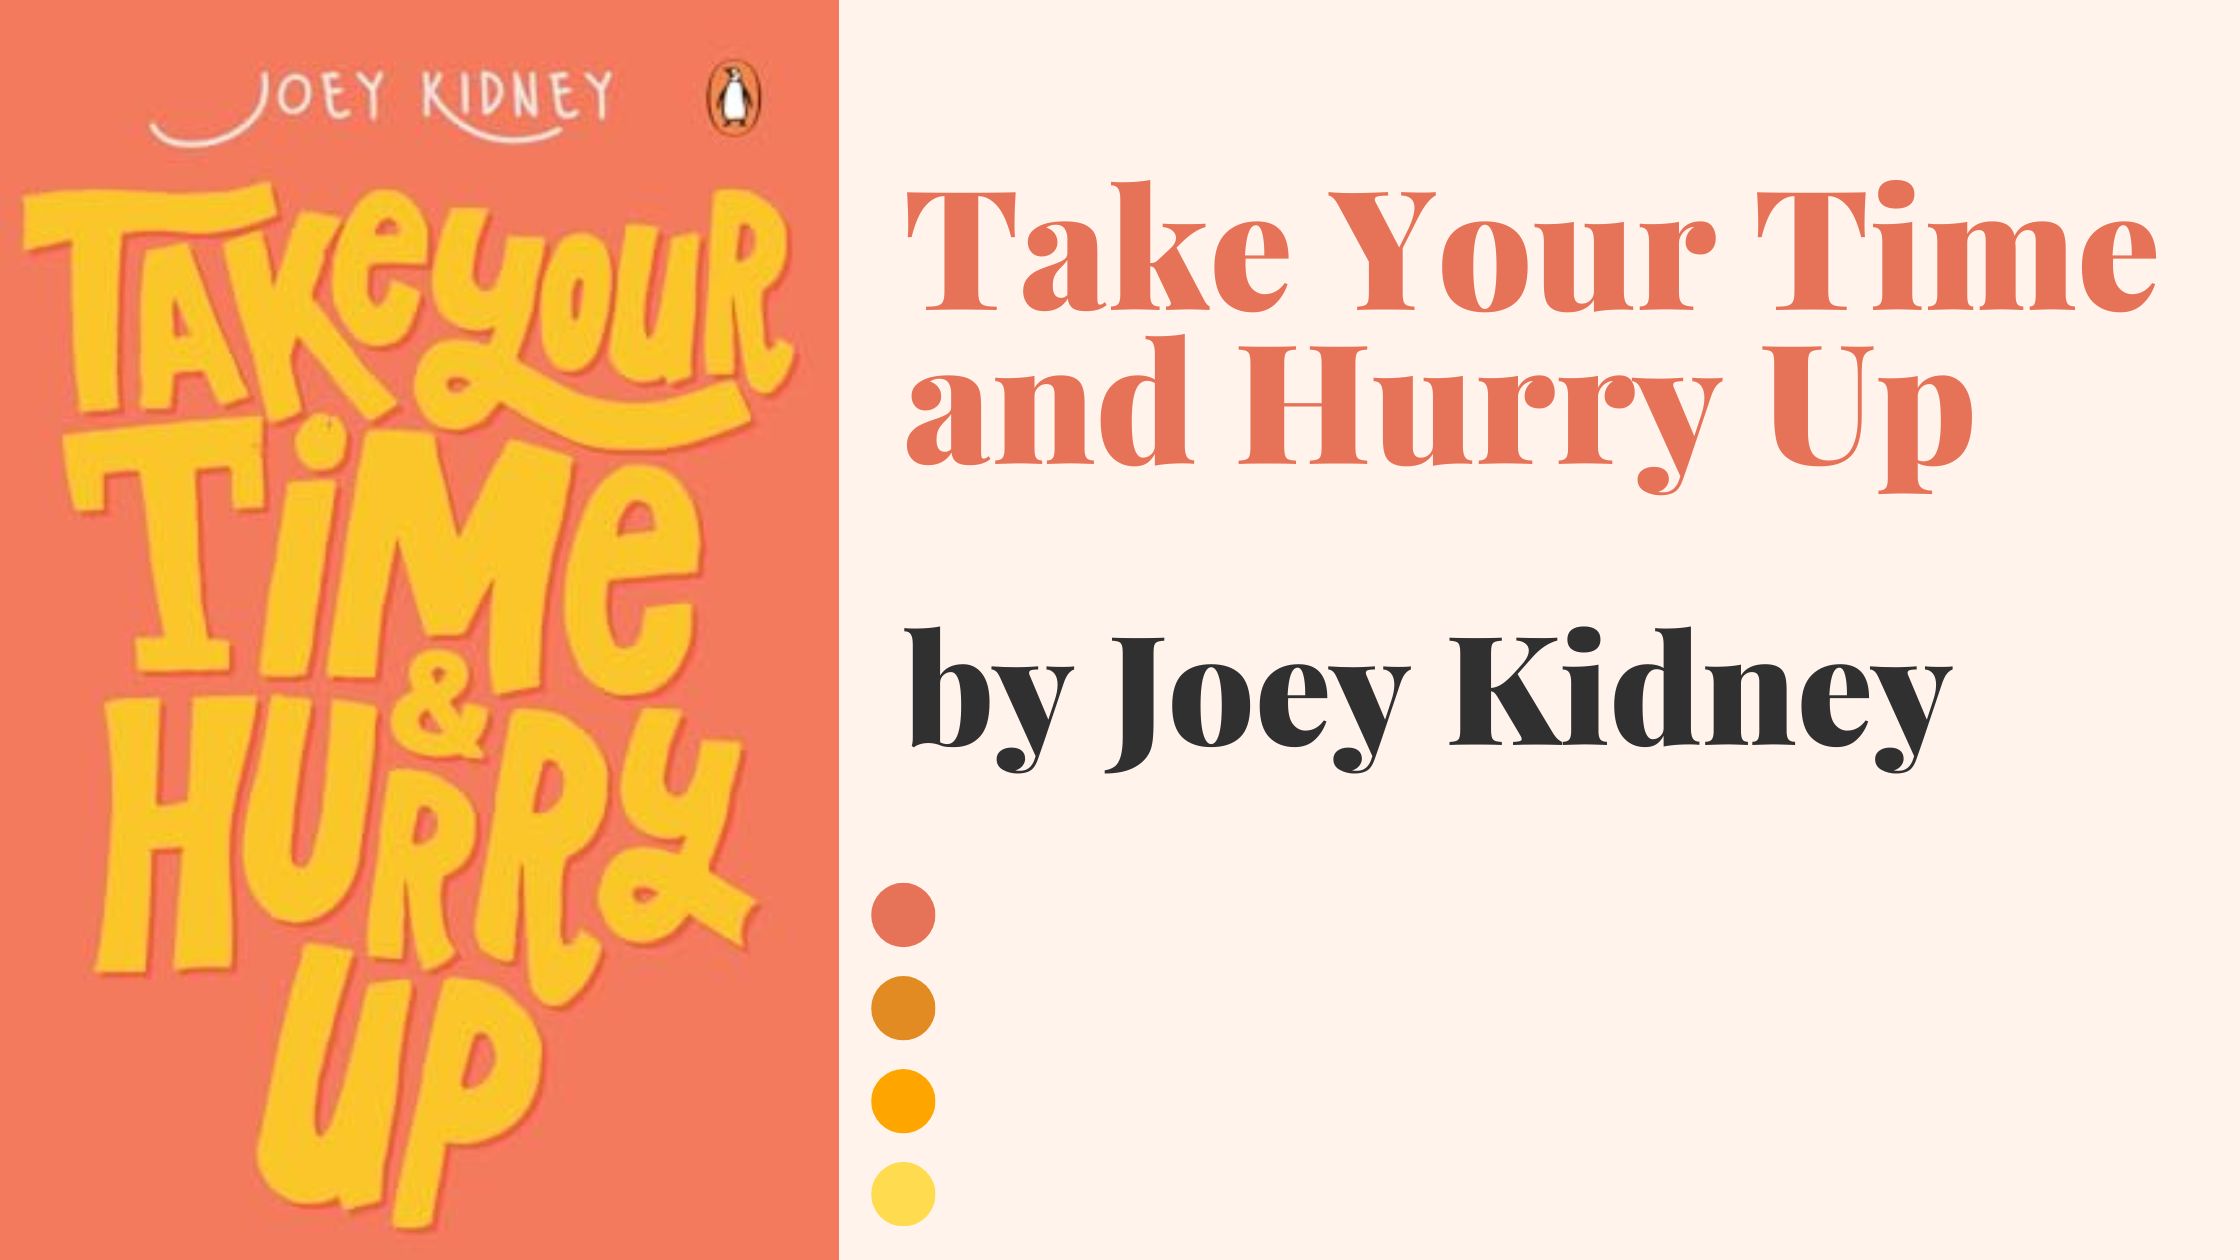 Take Your Time and Hurry Up by Joey Kidney